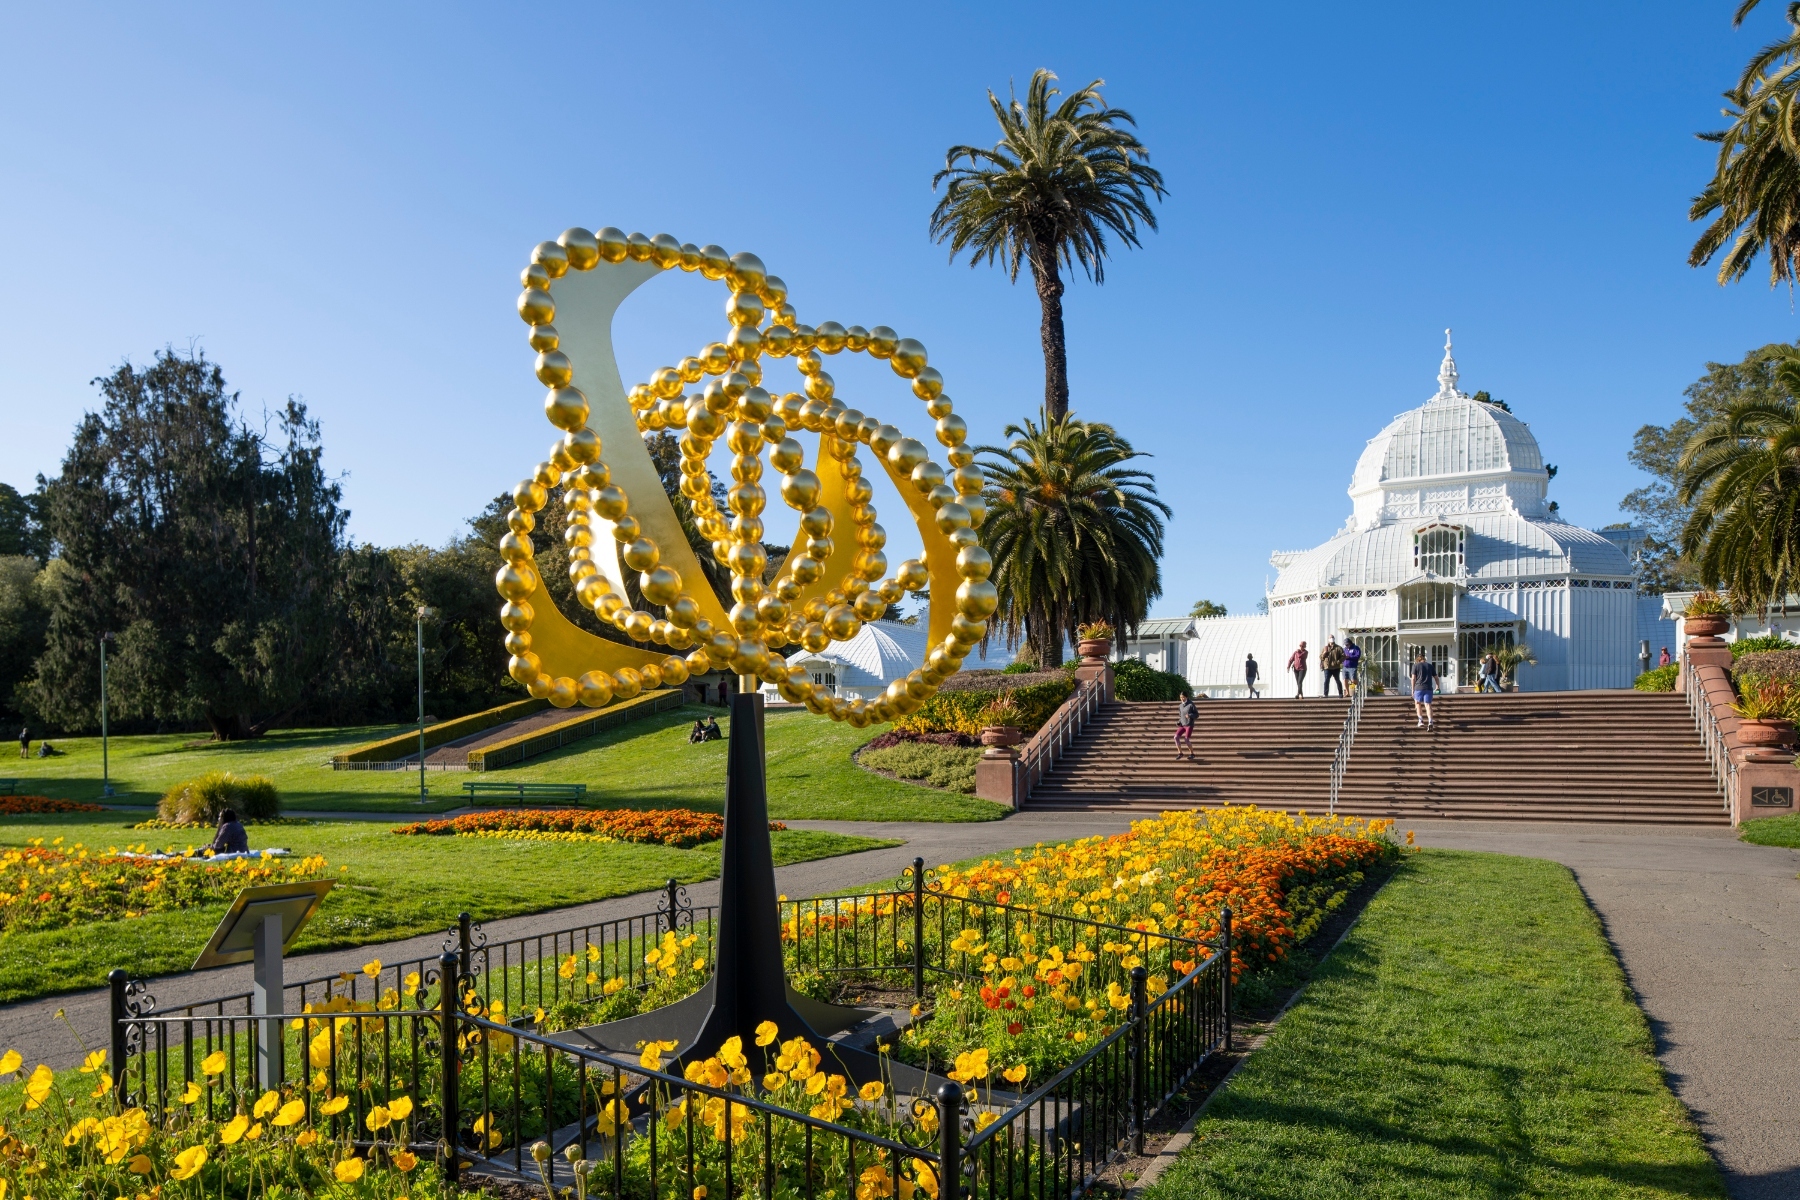 Golden spiral sculpture, colorful flowers, and a white domed conservatory under a clear blue sky.